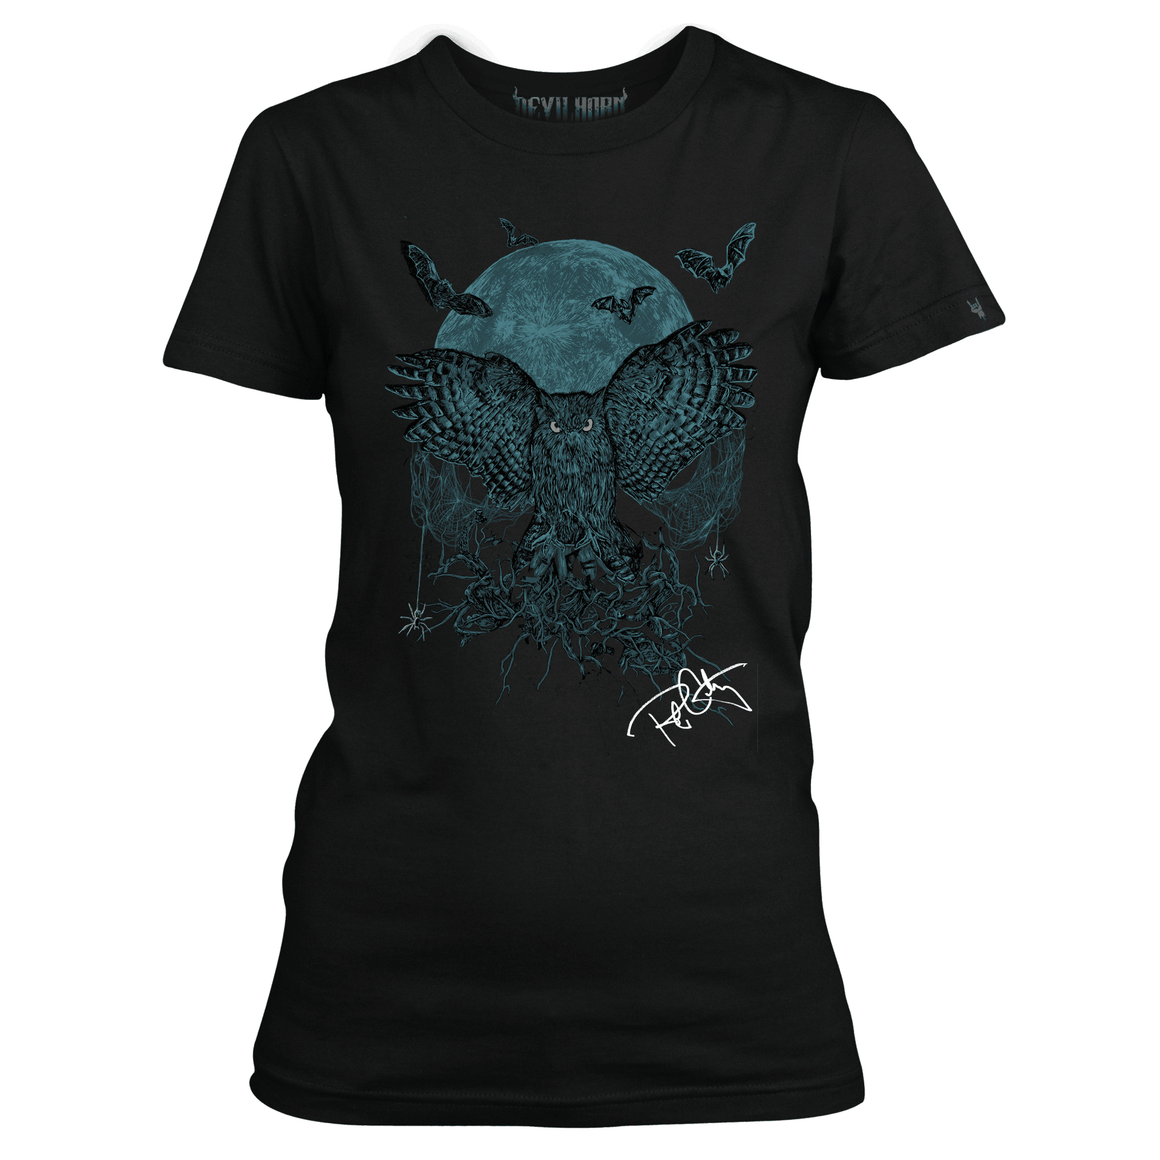 ROB CAVESTANY "NOCTURNAL" SIGNATURE ladies t shirt - DEVILHORN